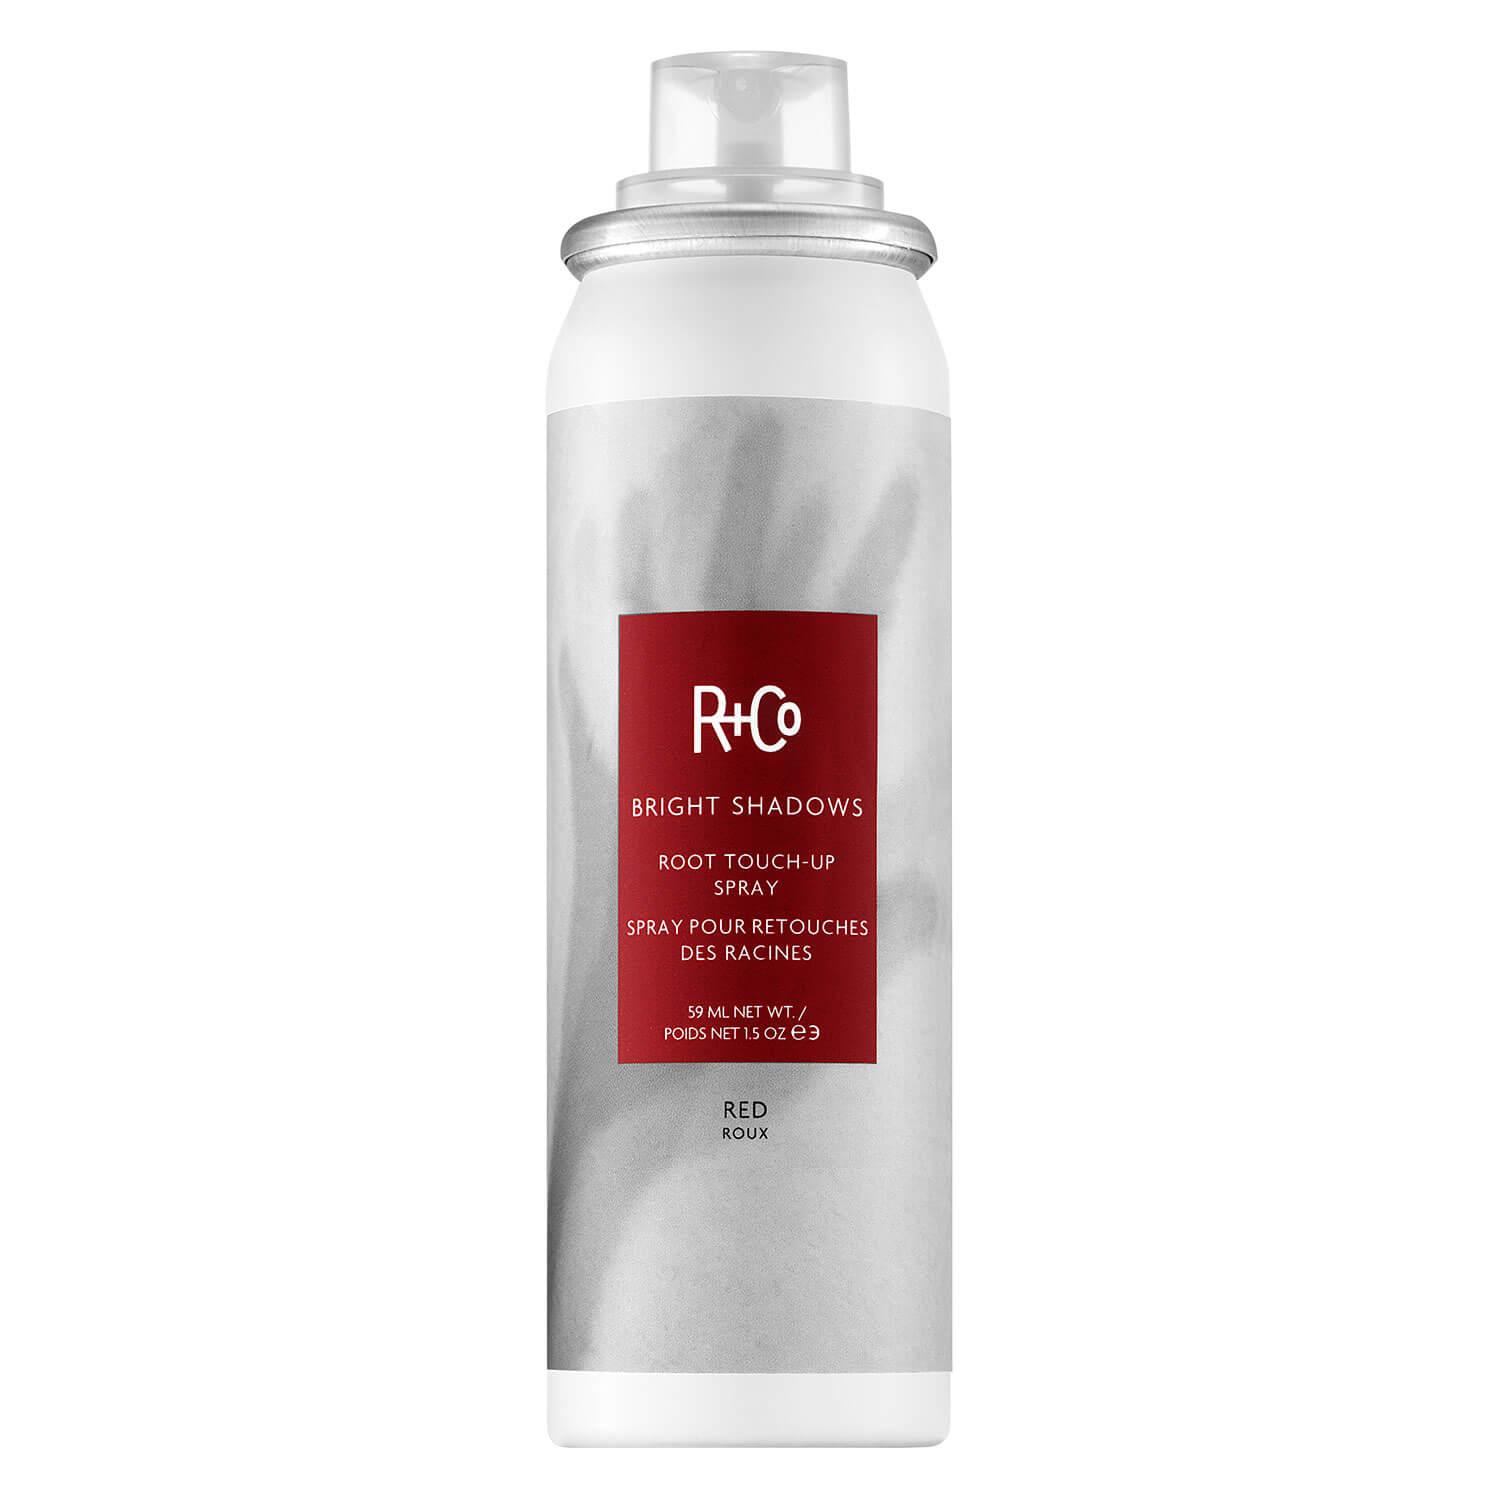 R+Co - Bright Shadows Root Touch-Up Spray Red